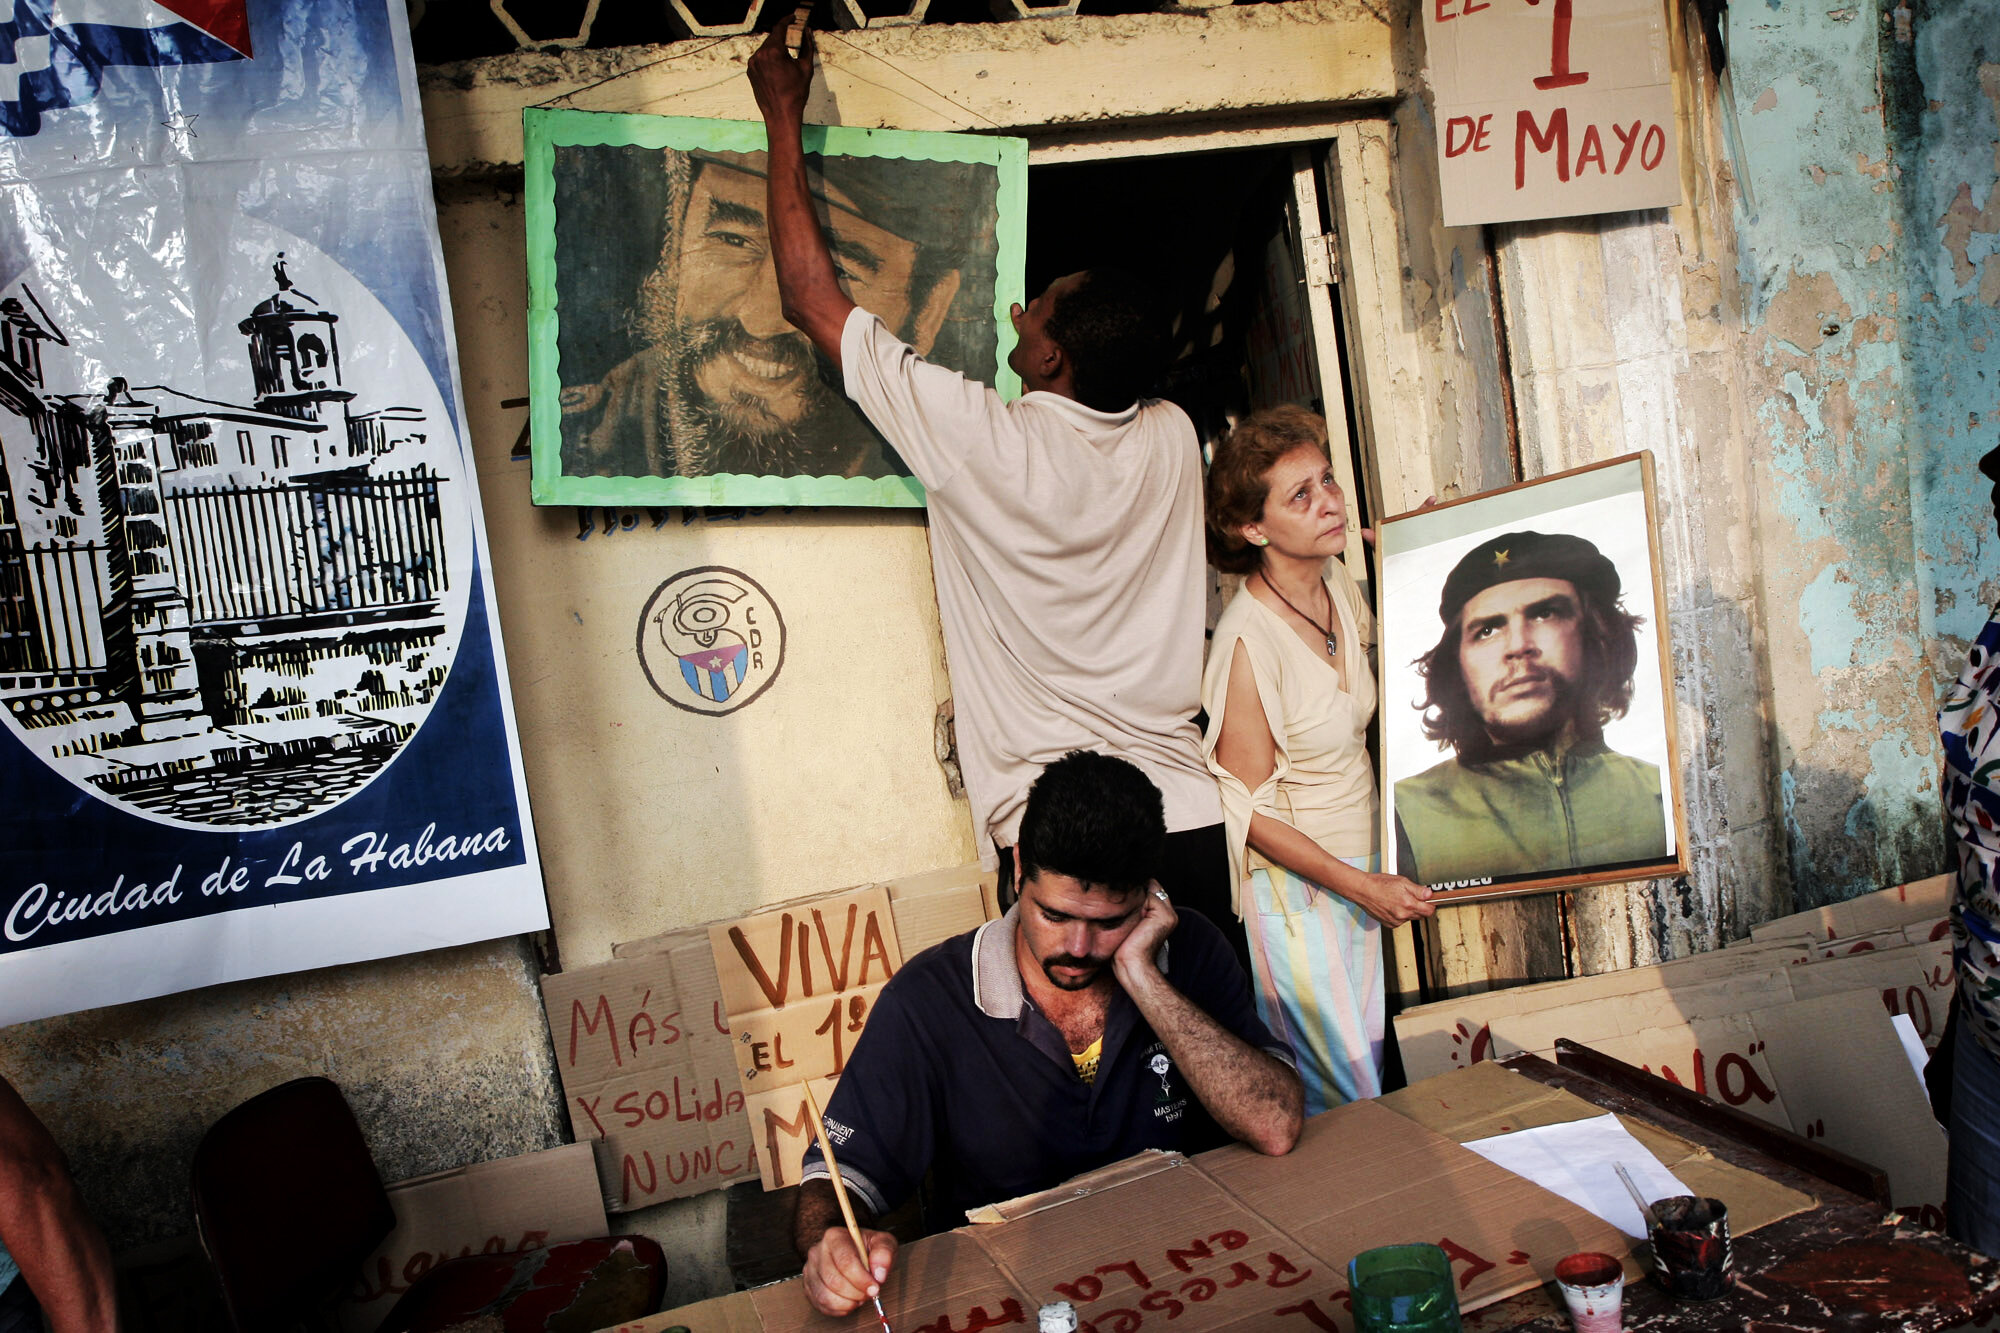  Pictures of Fidel Castro and Che Guevara are being hung up. Members of a CDR paint political slogans and propaganda for the May Day march, 2007.                       